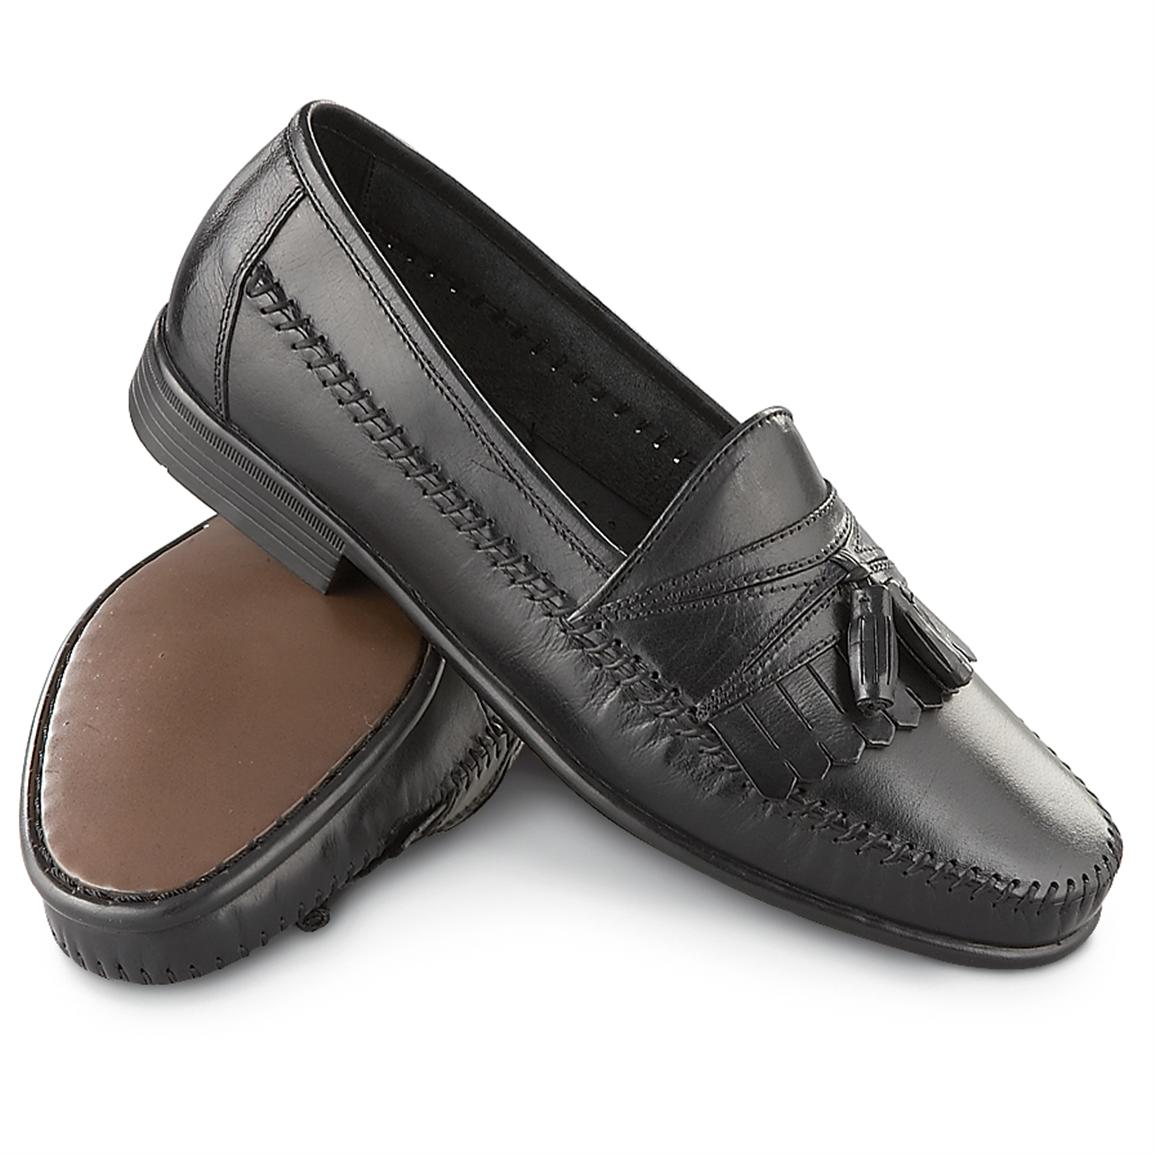 Men's Hush Puppies® Napoli II Loafers, Black 189450, Dress Shoes at